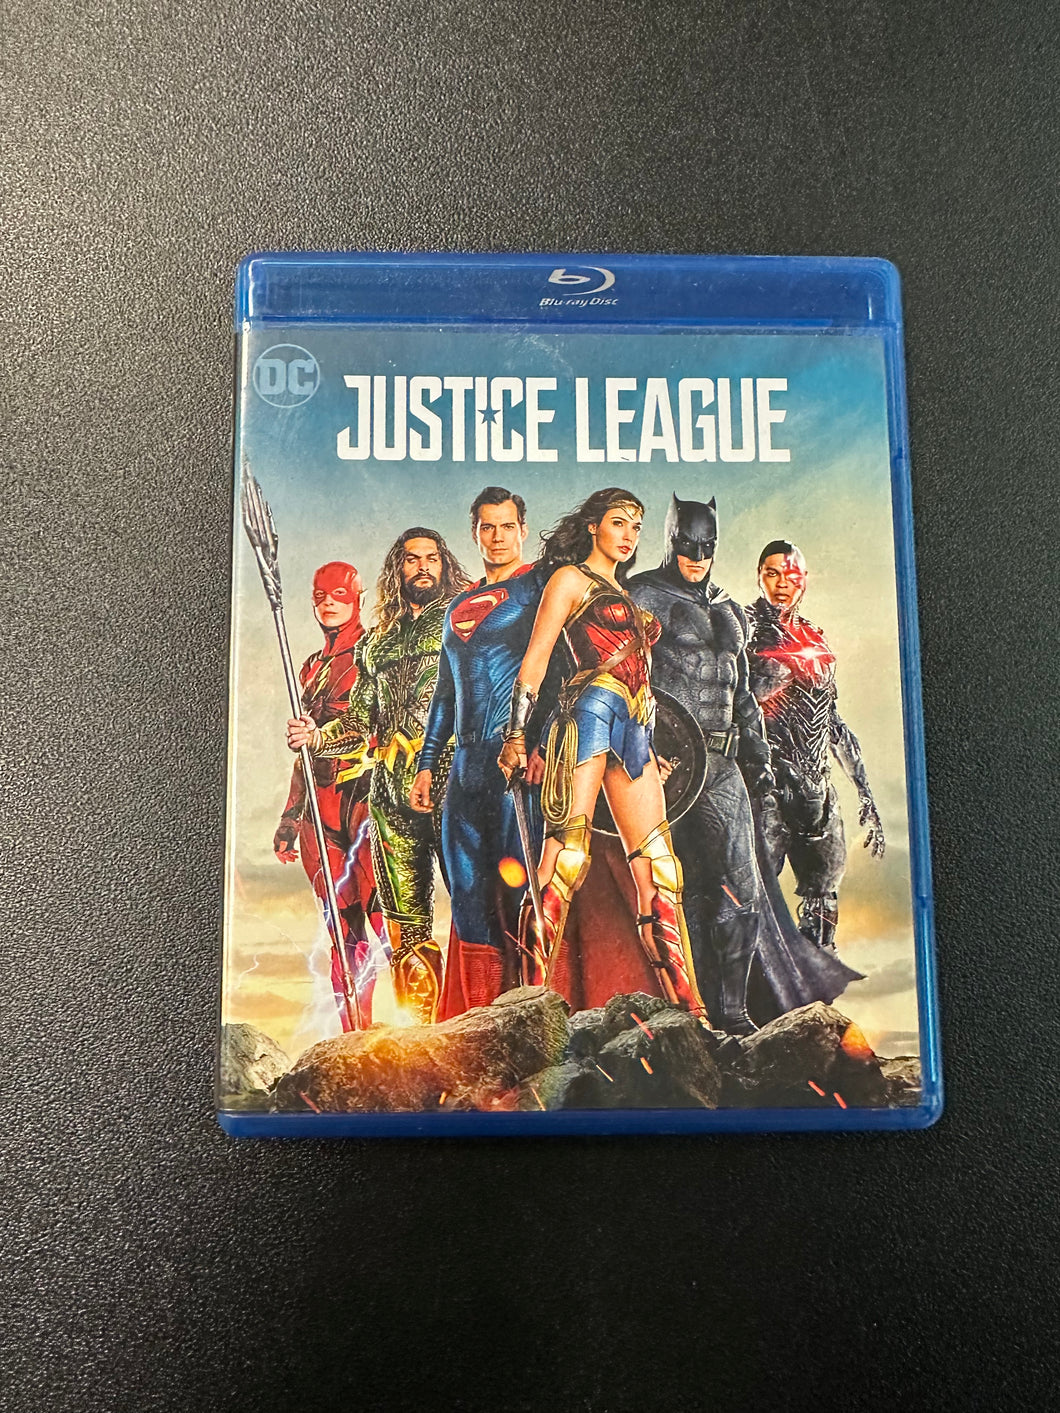 DC JUSTICE LEAGUE [BluRay + DVD] PREOWNED